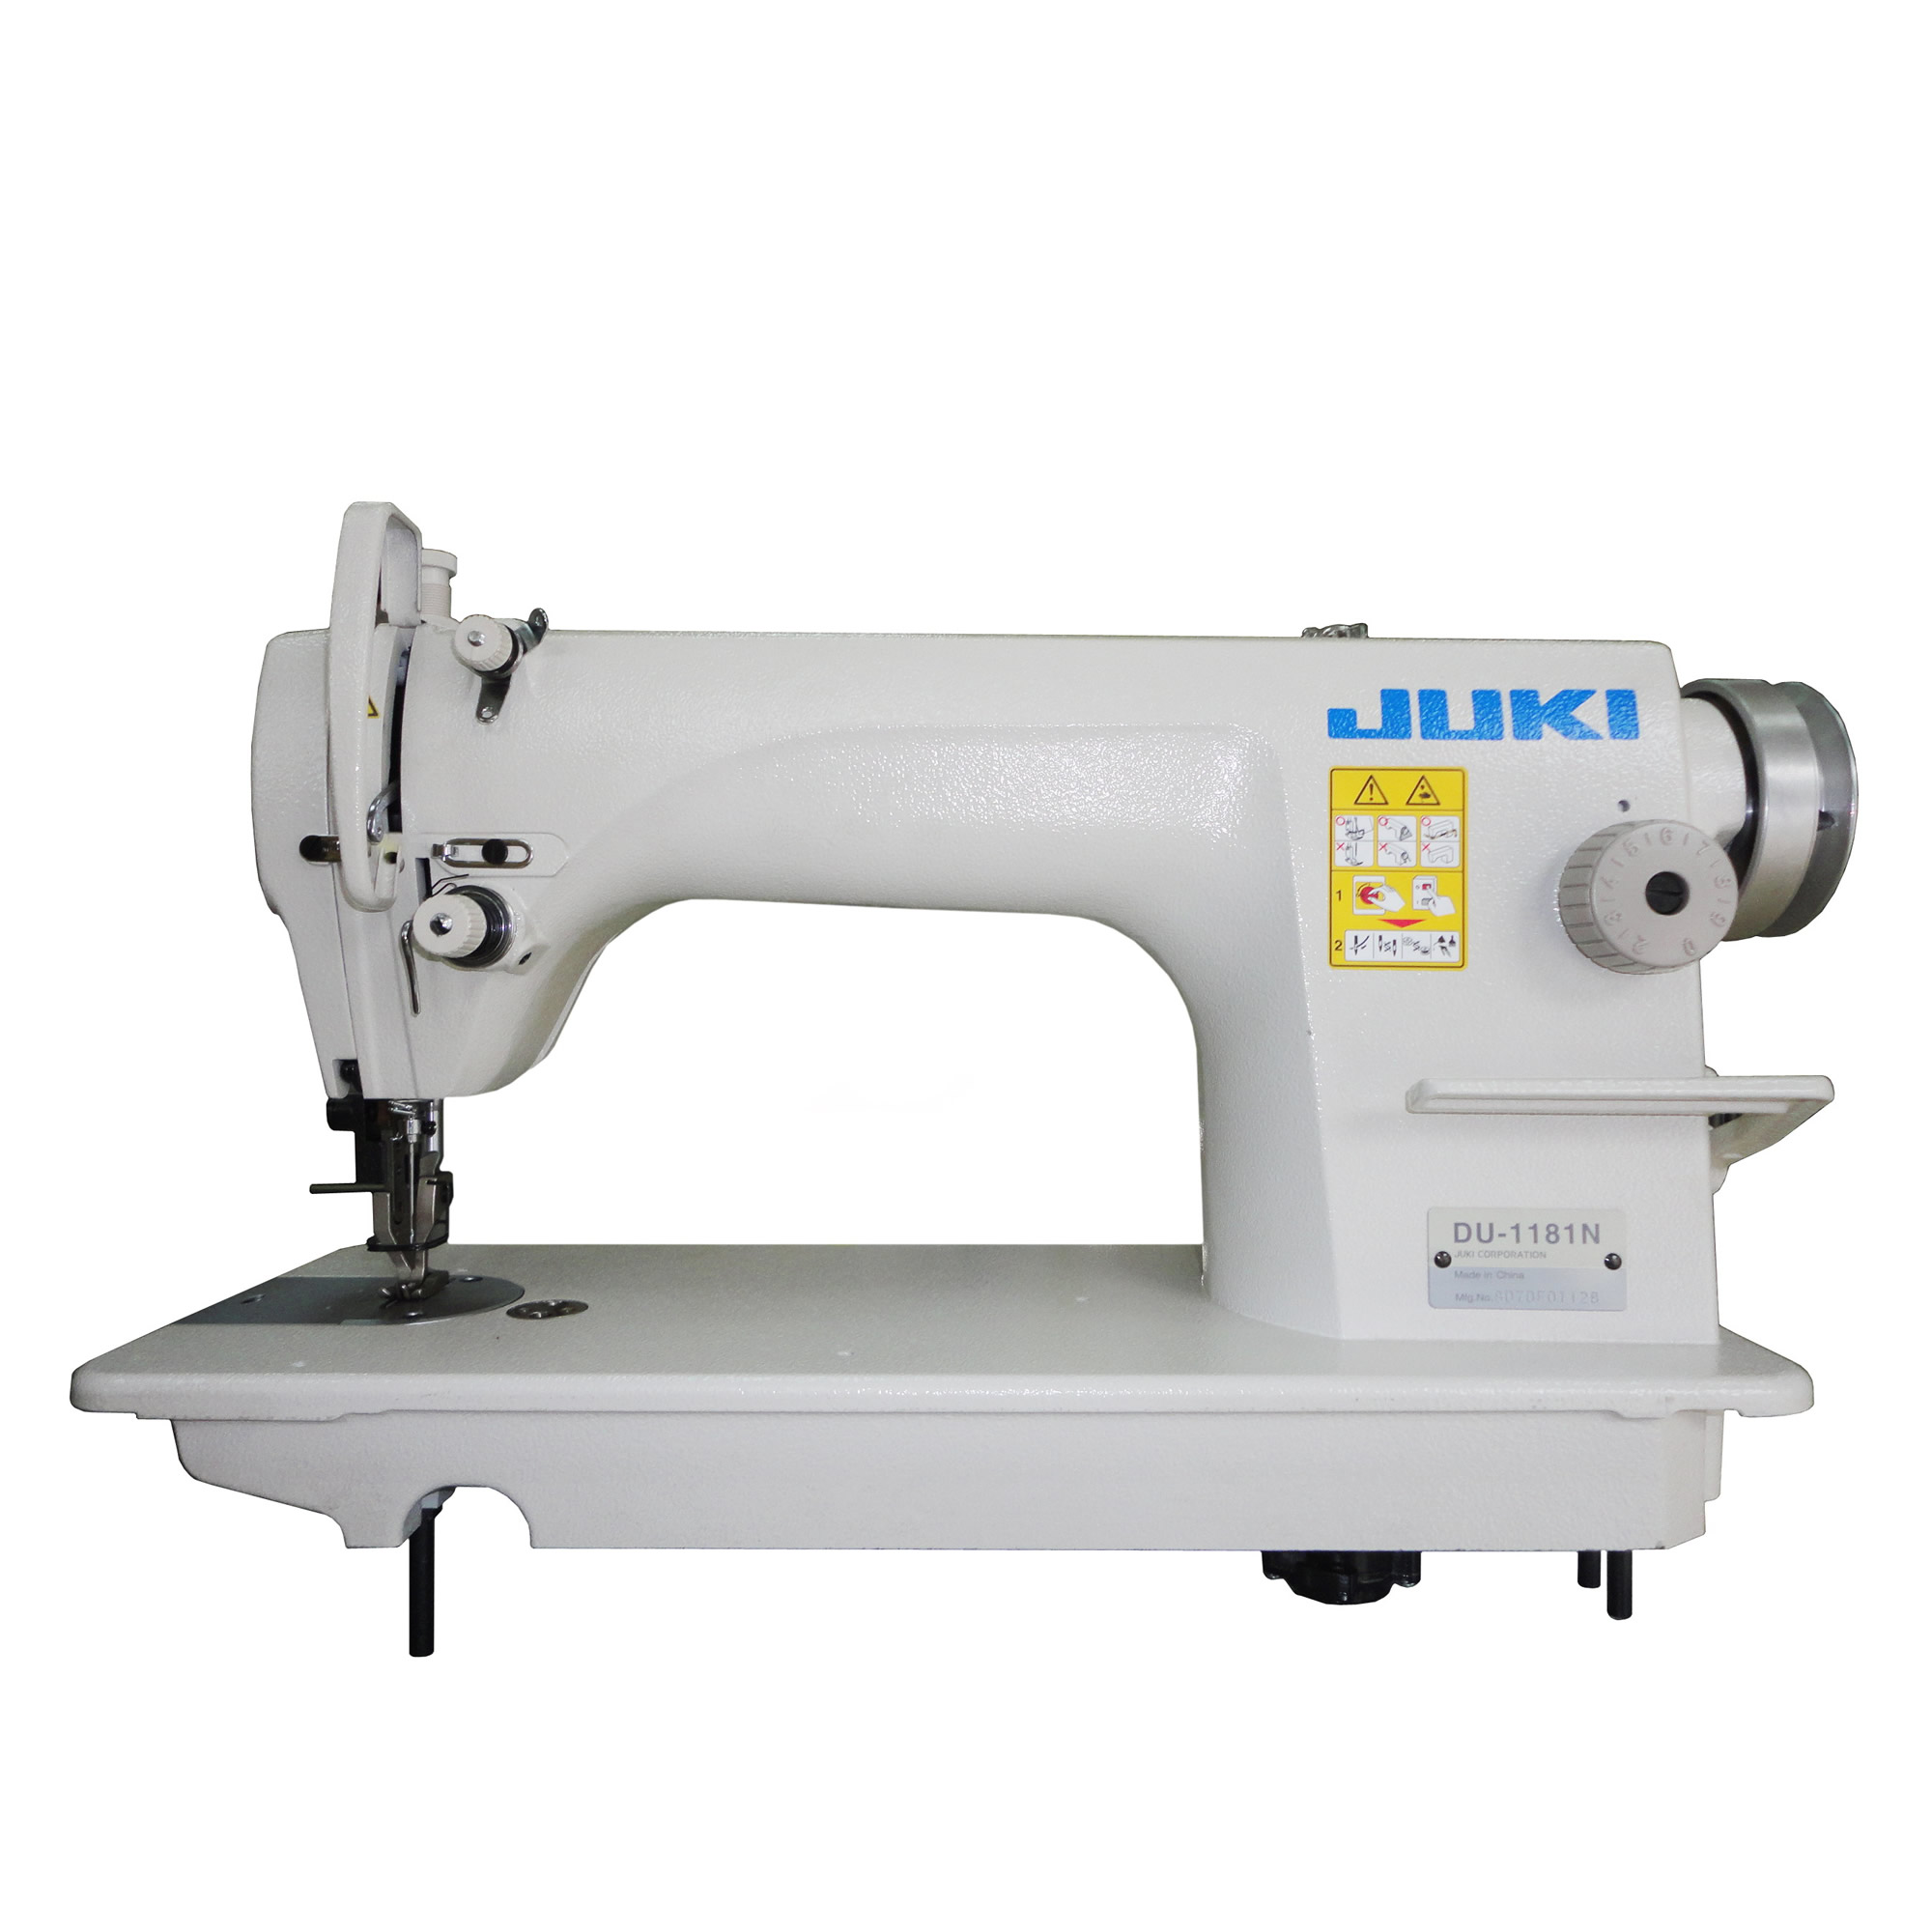 Juki Embroidery Sewing Machine | Embroidery Shops